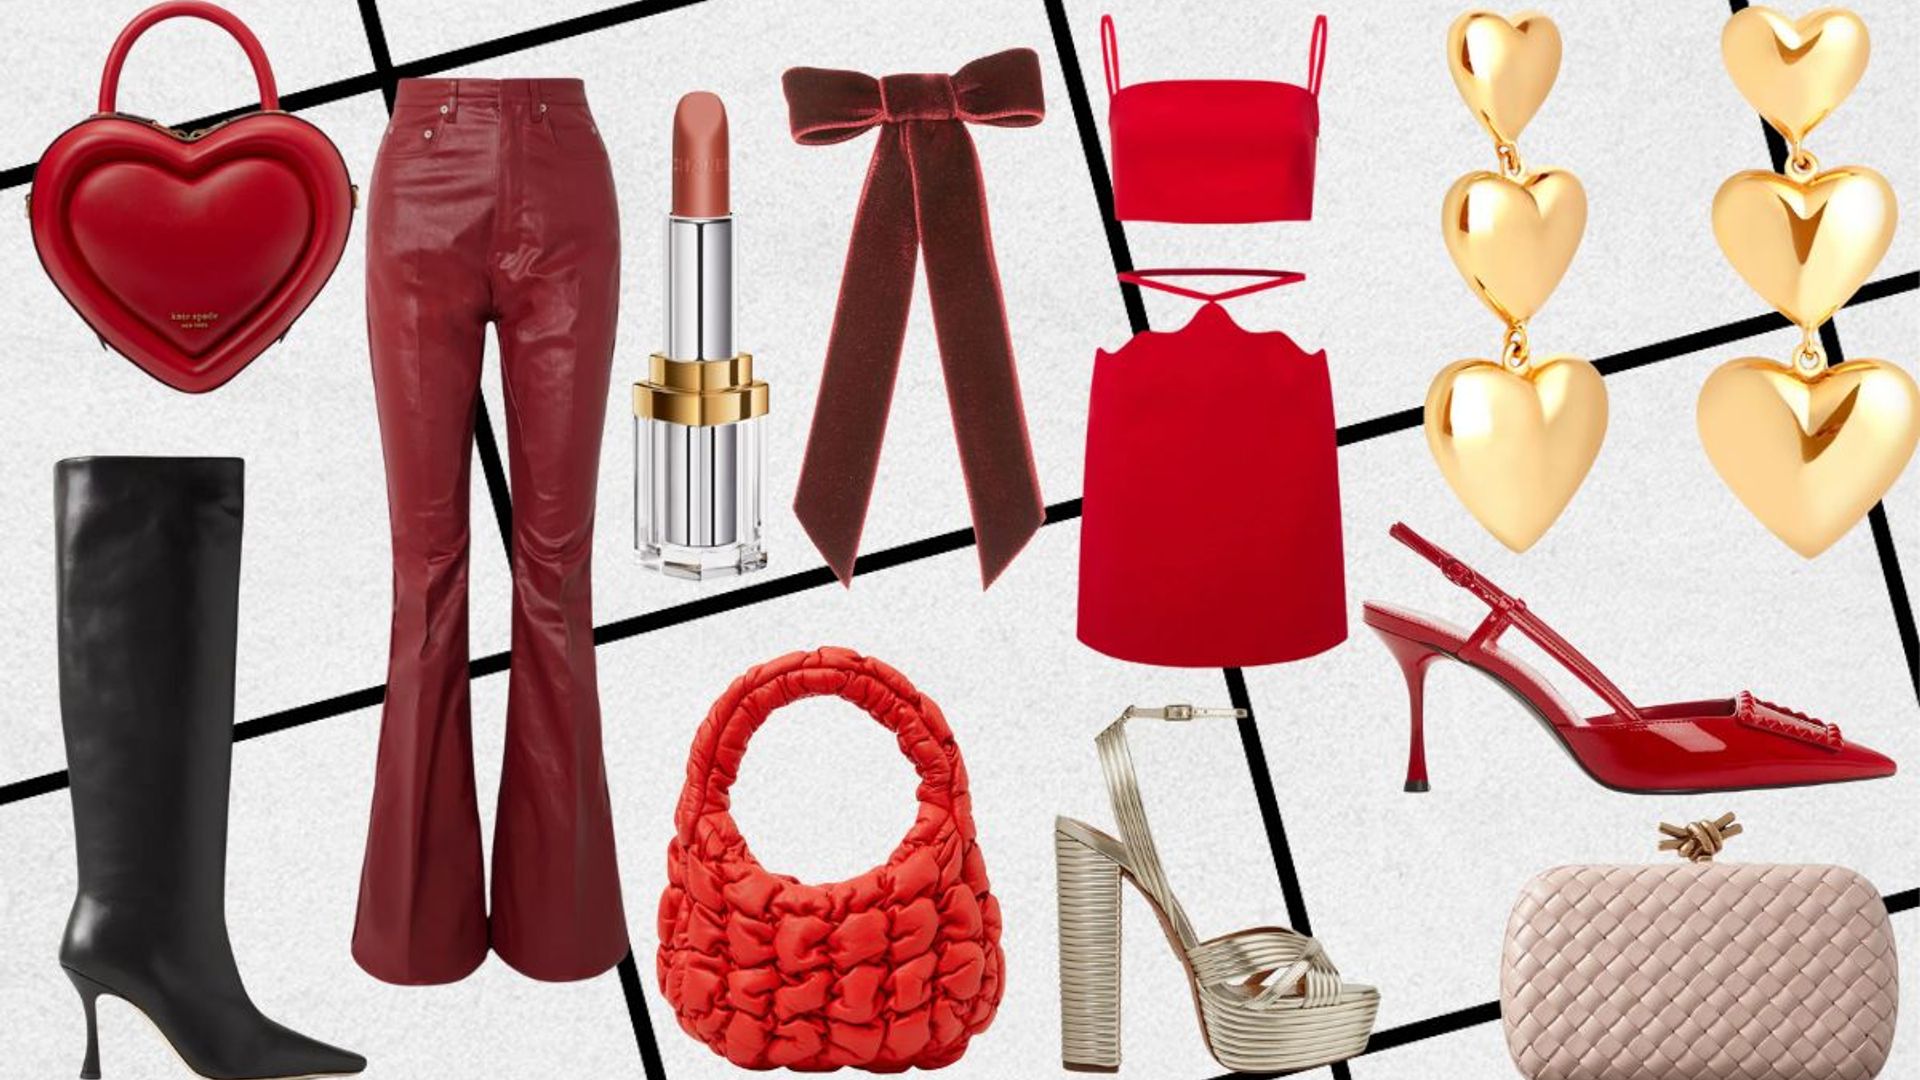 35+ Free New İdeas What To Wear For Valentine's Day 2021 - Page 2